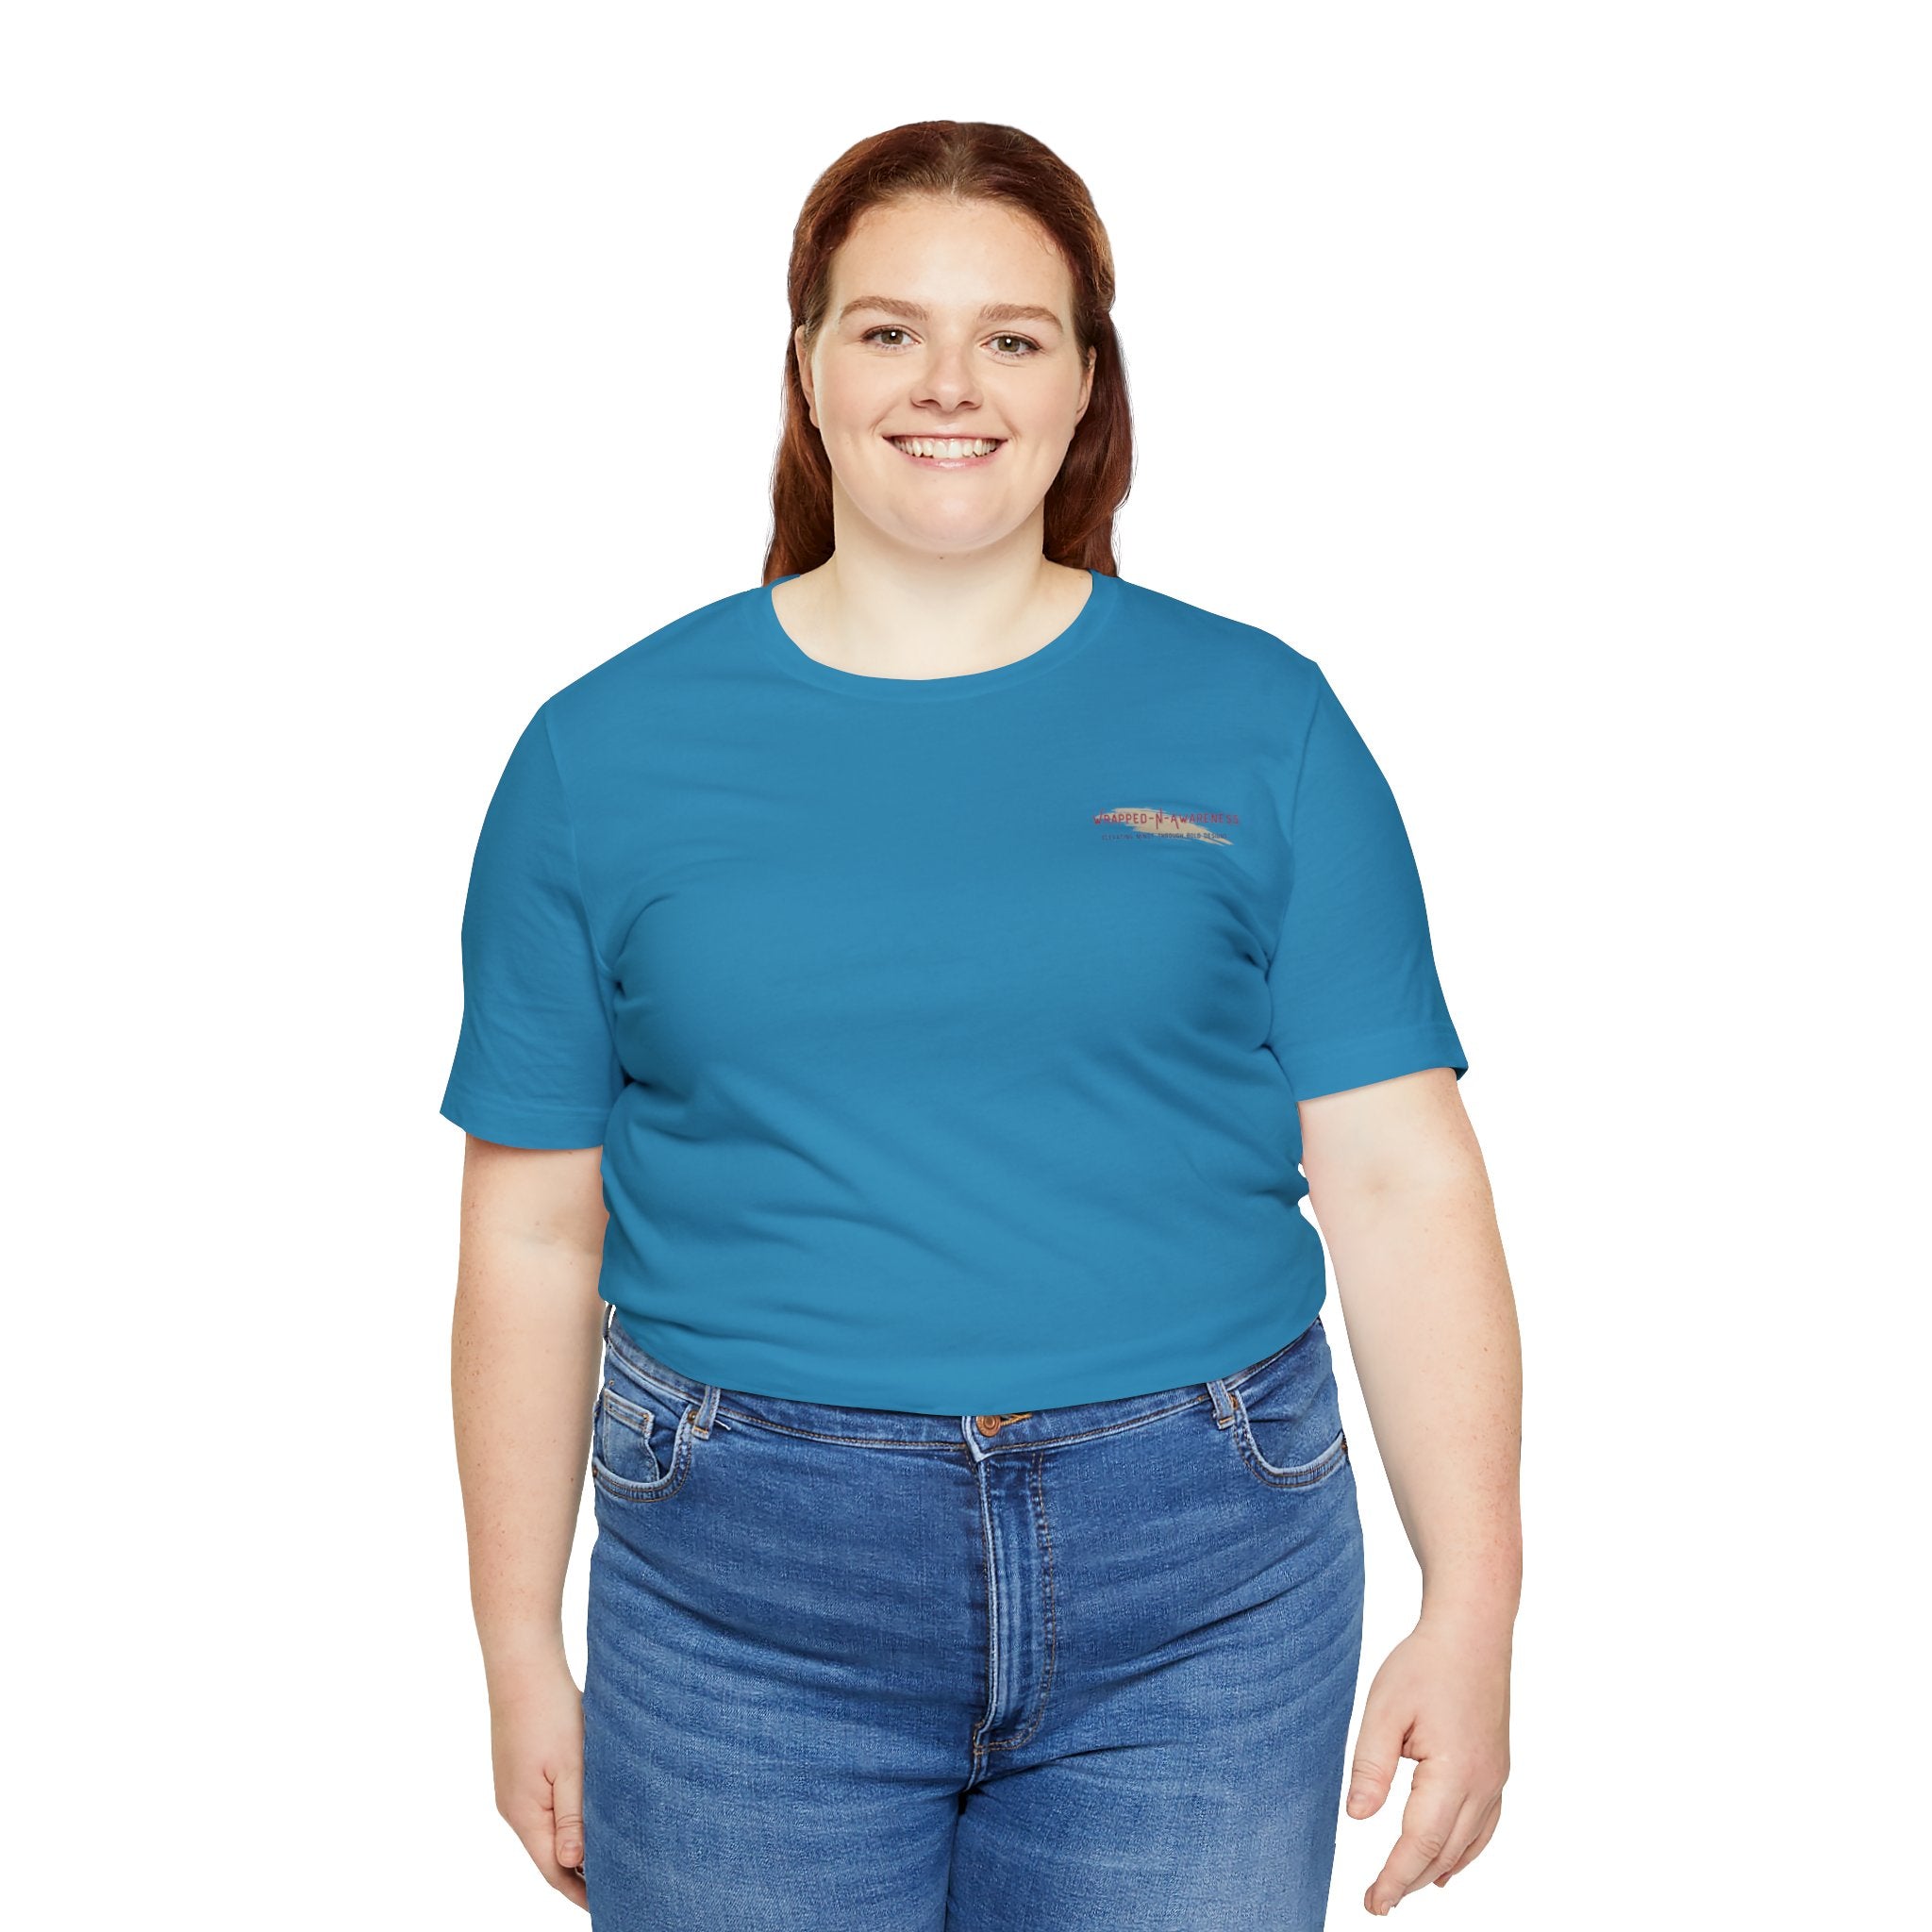 Inspire Growth Jersey Tee - Bella+Canvas 3001 Turquoise Airlume Cotton Bella+Canvas 3001 Crew Neckline Jersey Short Sleeve Lightweight Fabric Mental Health Support Retail Fit Tear-away Label Tee Unisex Tee T-Shirt 15719615111280804163_2048 Printify